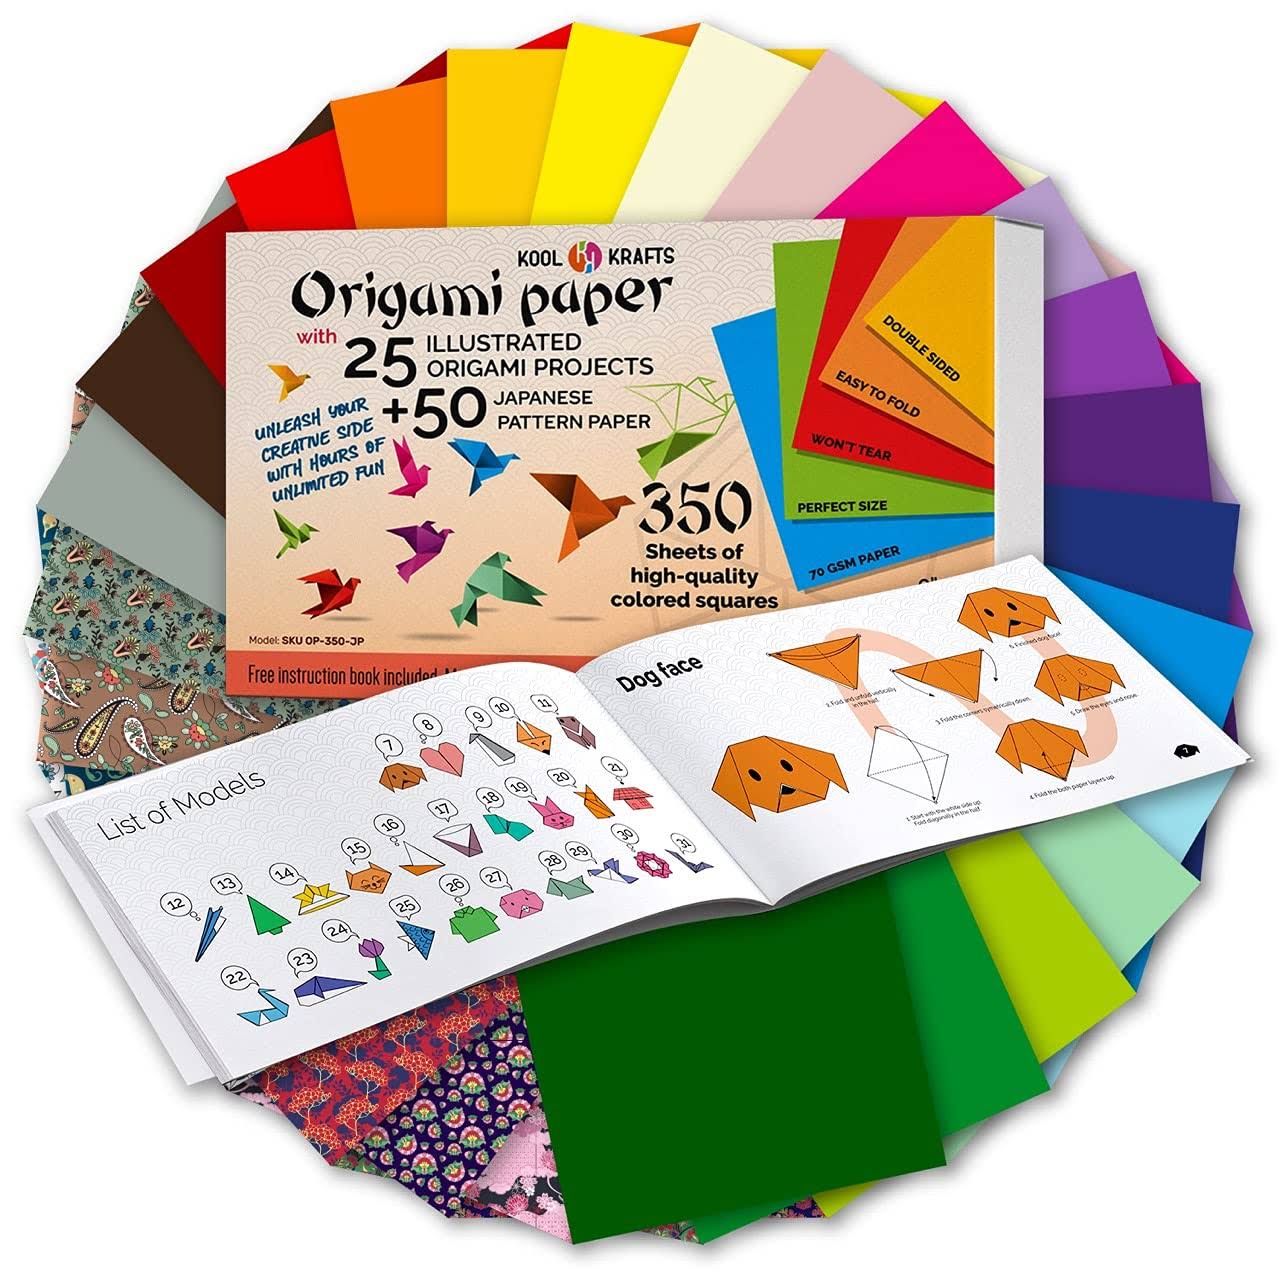 Origami Paper | 350 Origami Paper Kit | Set Includes - 300 Sheets 20 Colors 6x6 | 50 Traditional Japanese Patterns | Origami Book 25 Easy Colored